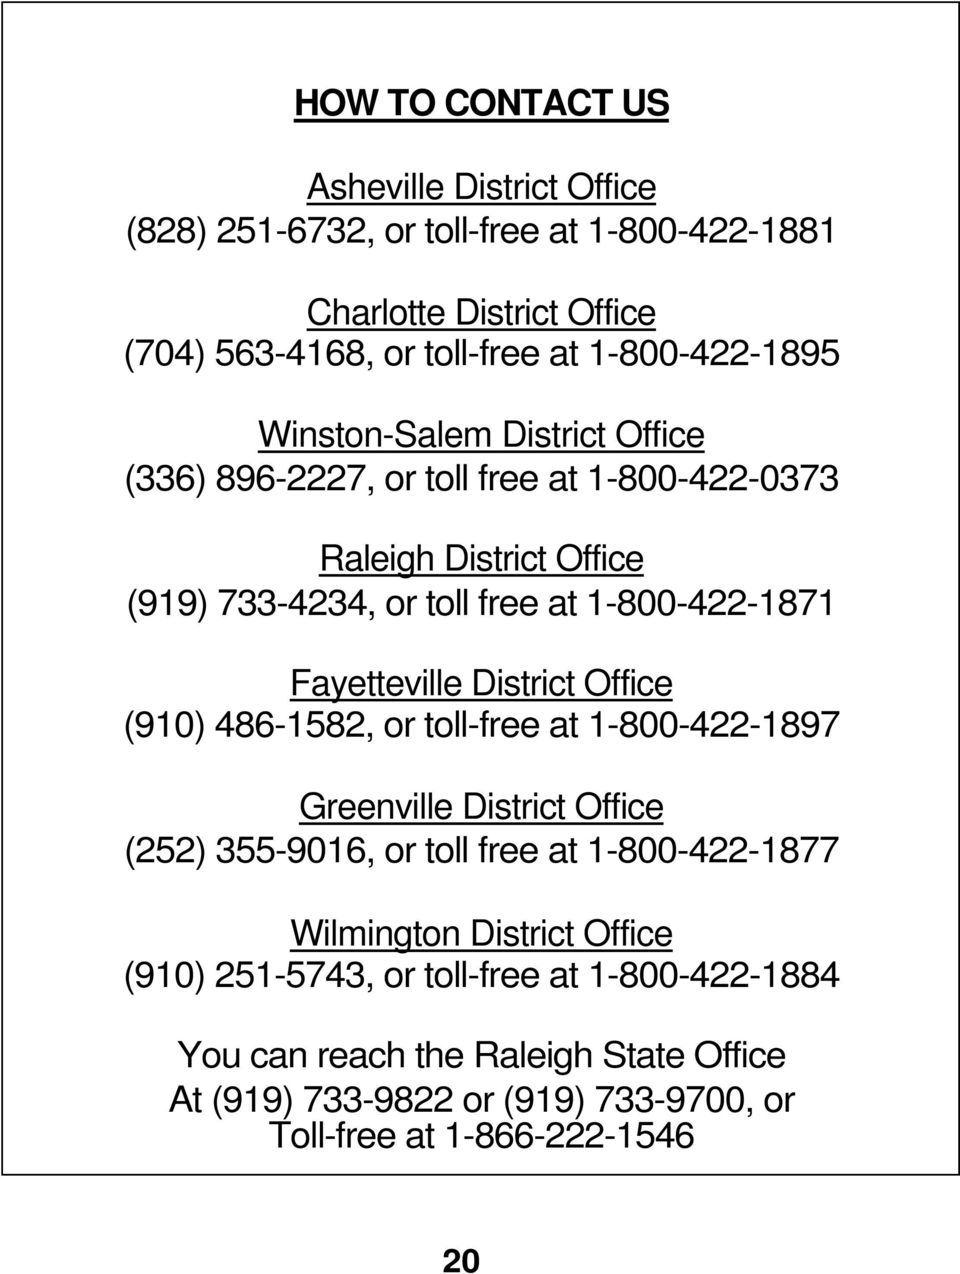 1-800-422-1871 Fayetteville District Office (910) 486-1582, or toll-free at 1-800-422-1897 Greenville District Office (252) 355-9016, or toll free at